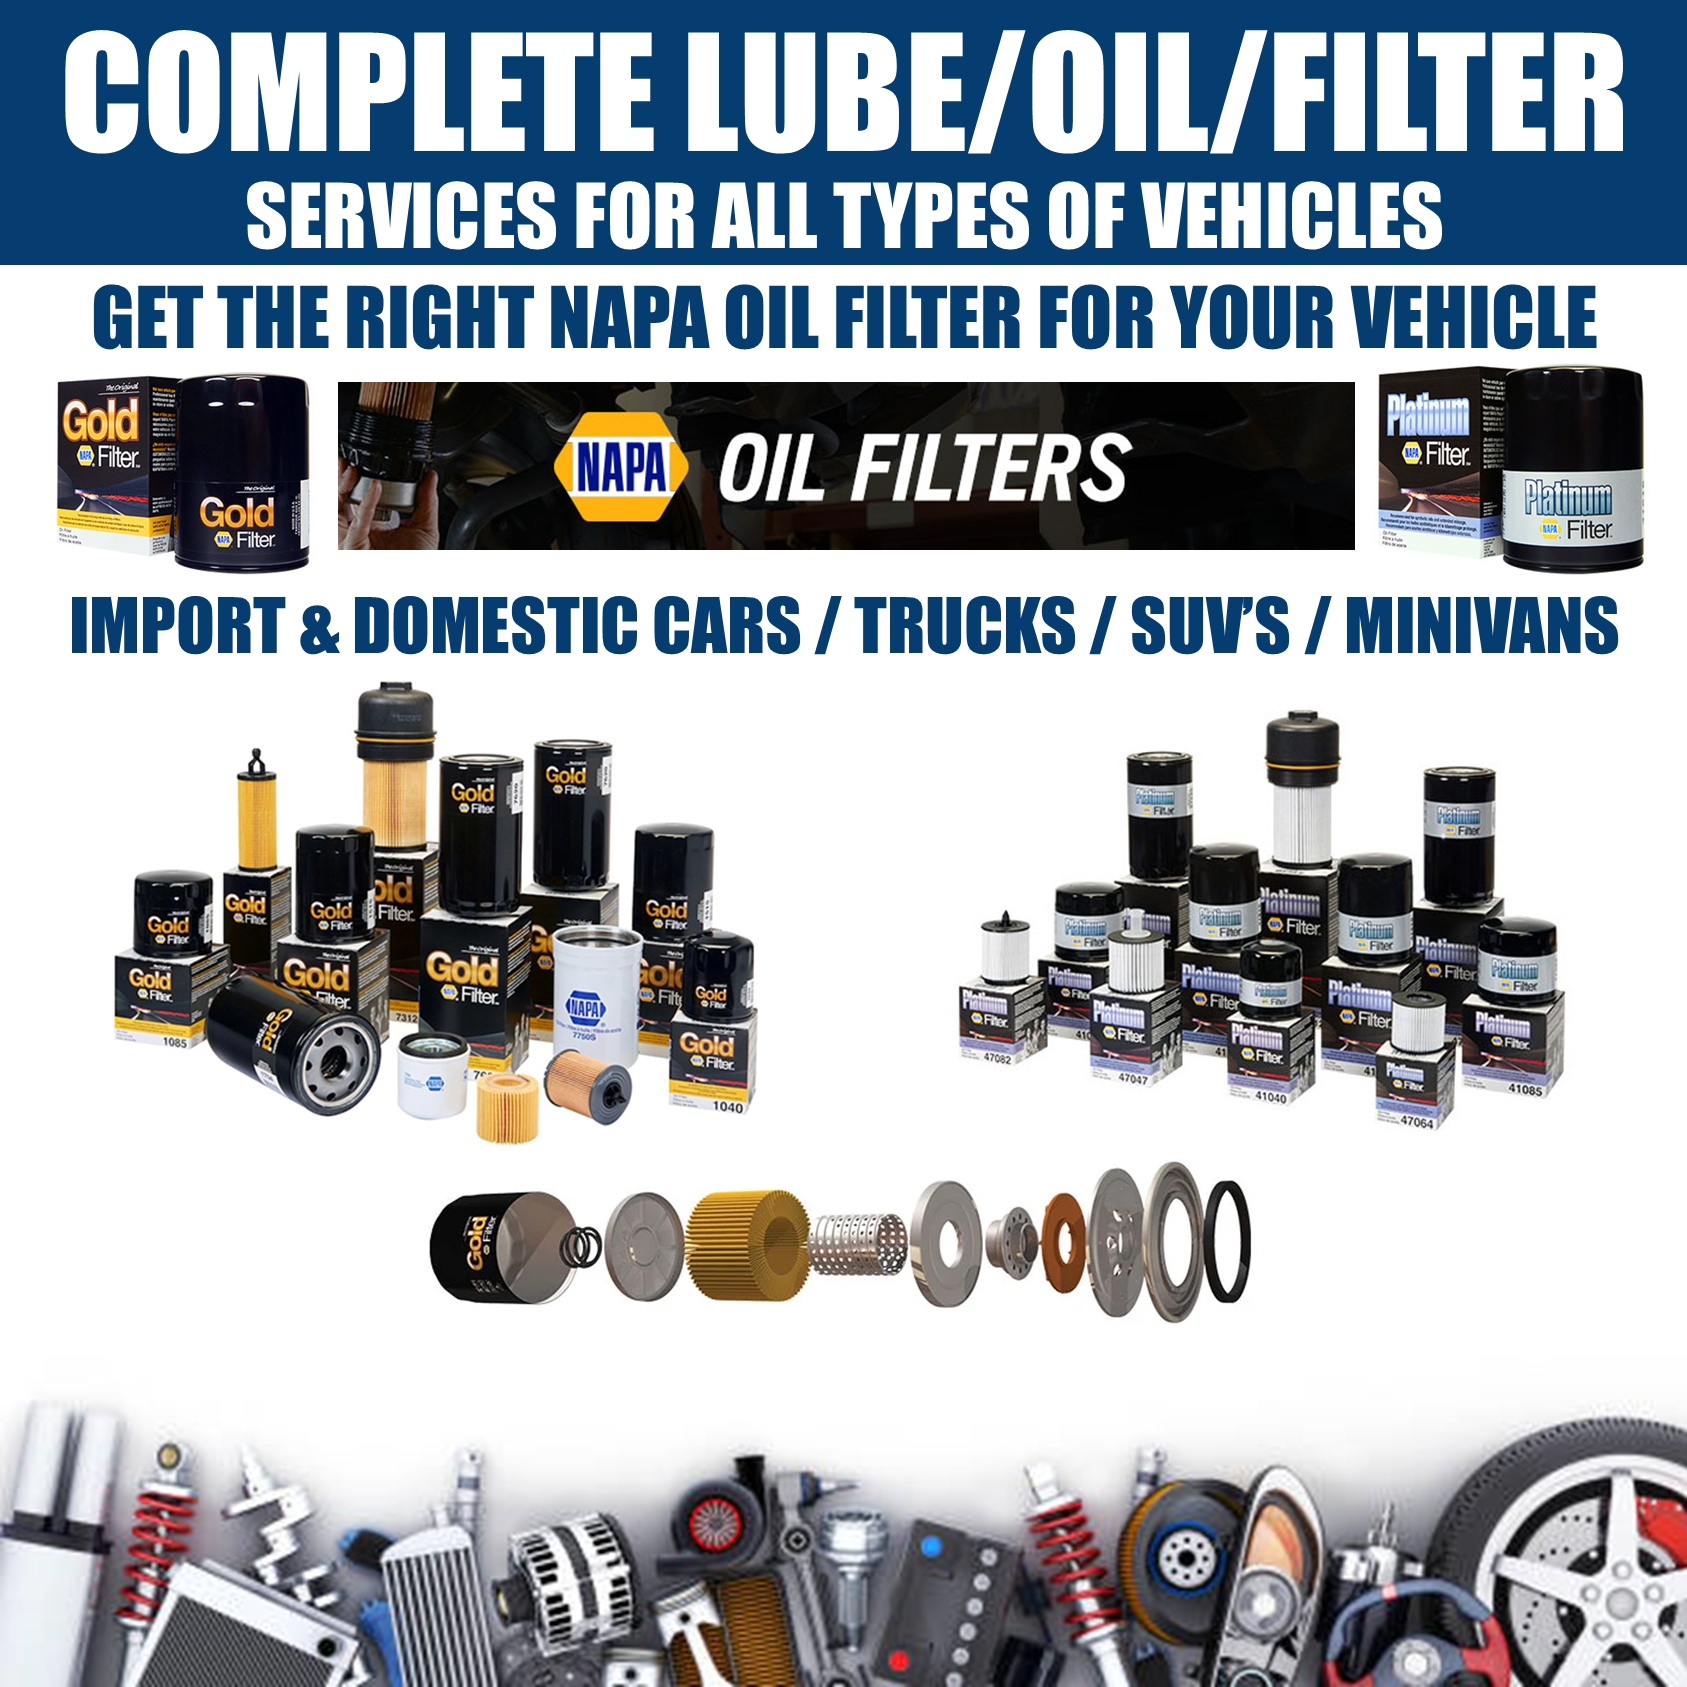 Complete lube , oil and filter services.